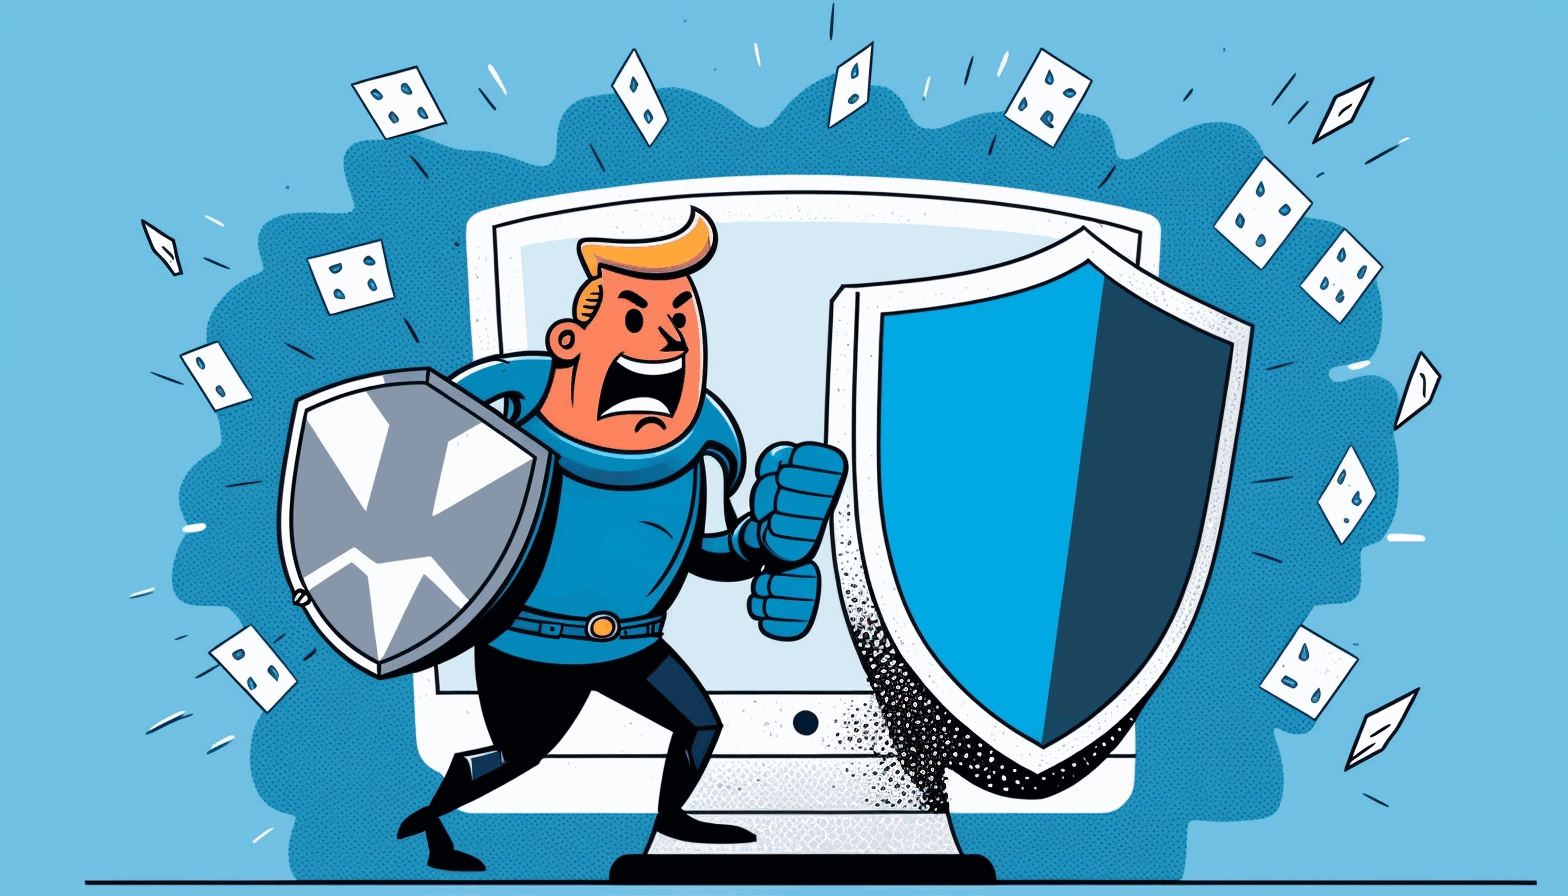 A cartoon illustration of a person holding a shield and standing in front of a computer with various attack vectors coming towards them.